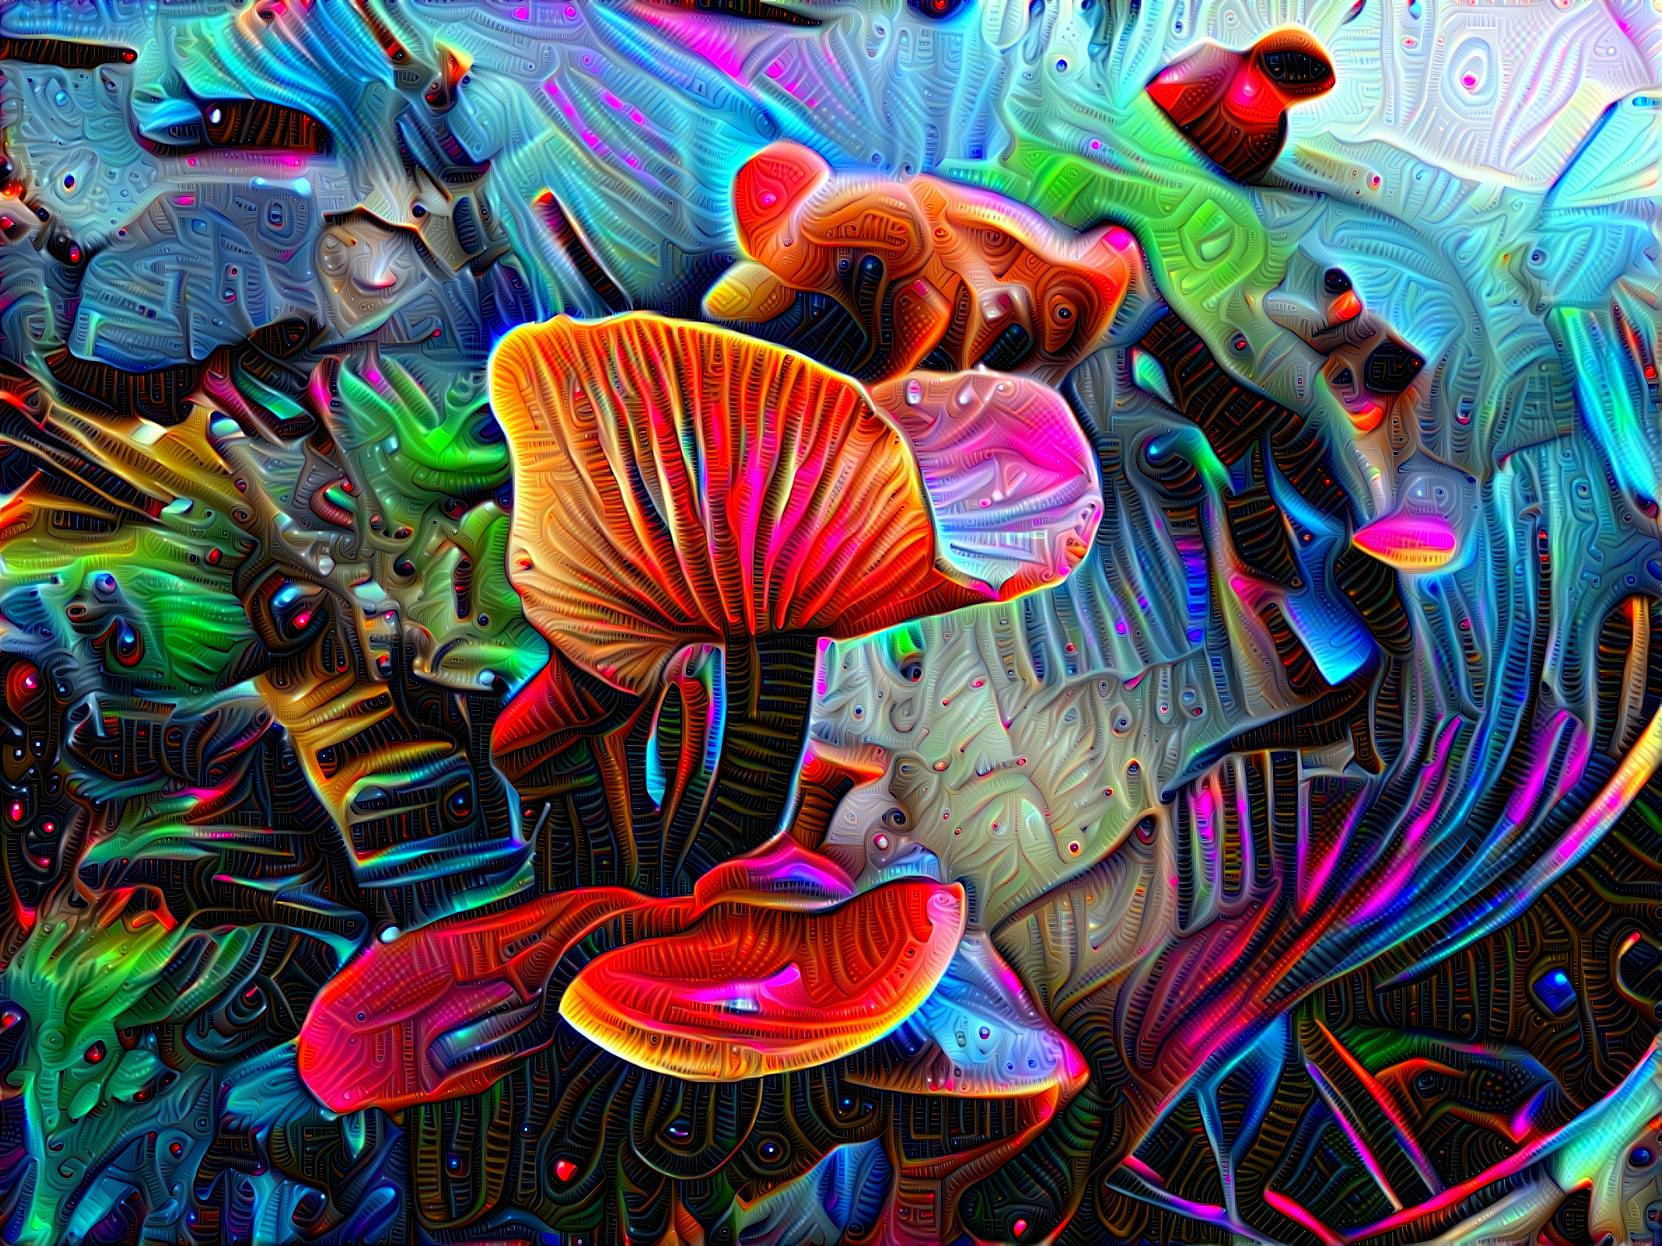 From Deep Style to Deep Dream